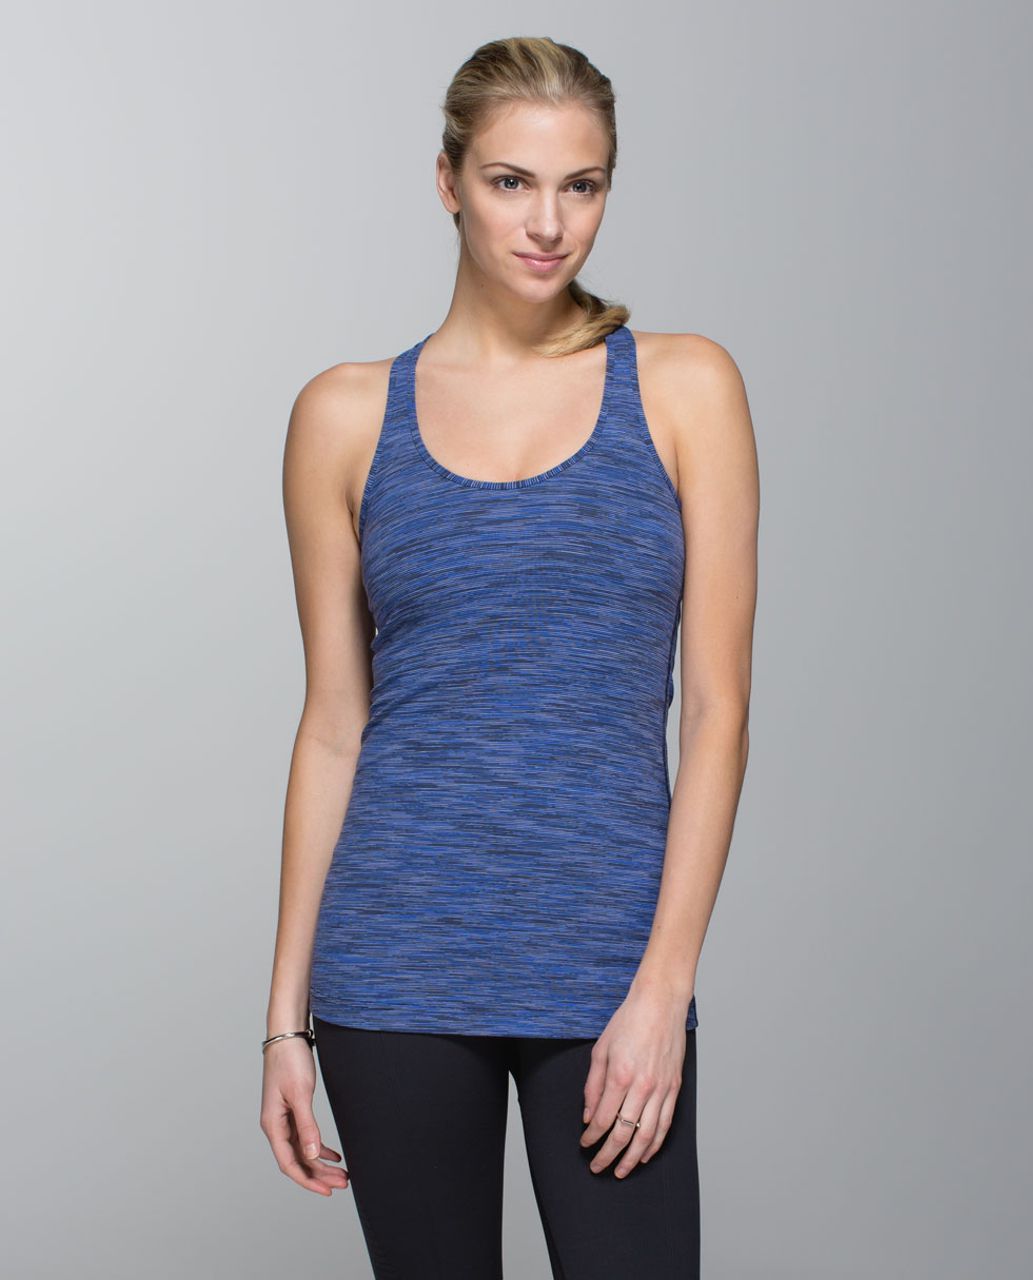 Lululemon Cool Racerback - Wee Are From Space Cadet Blue